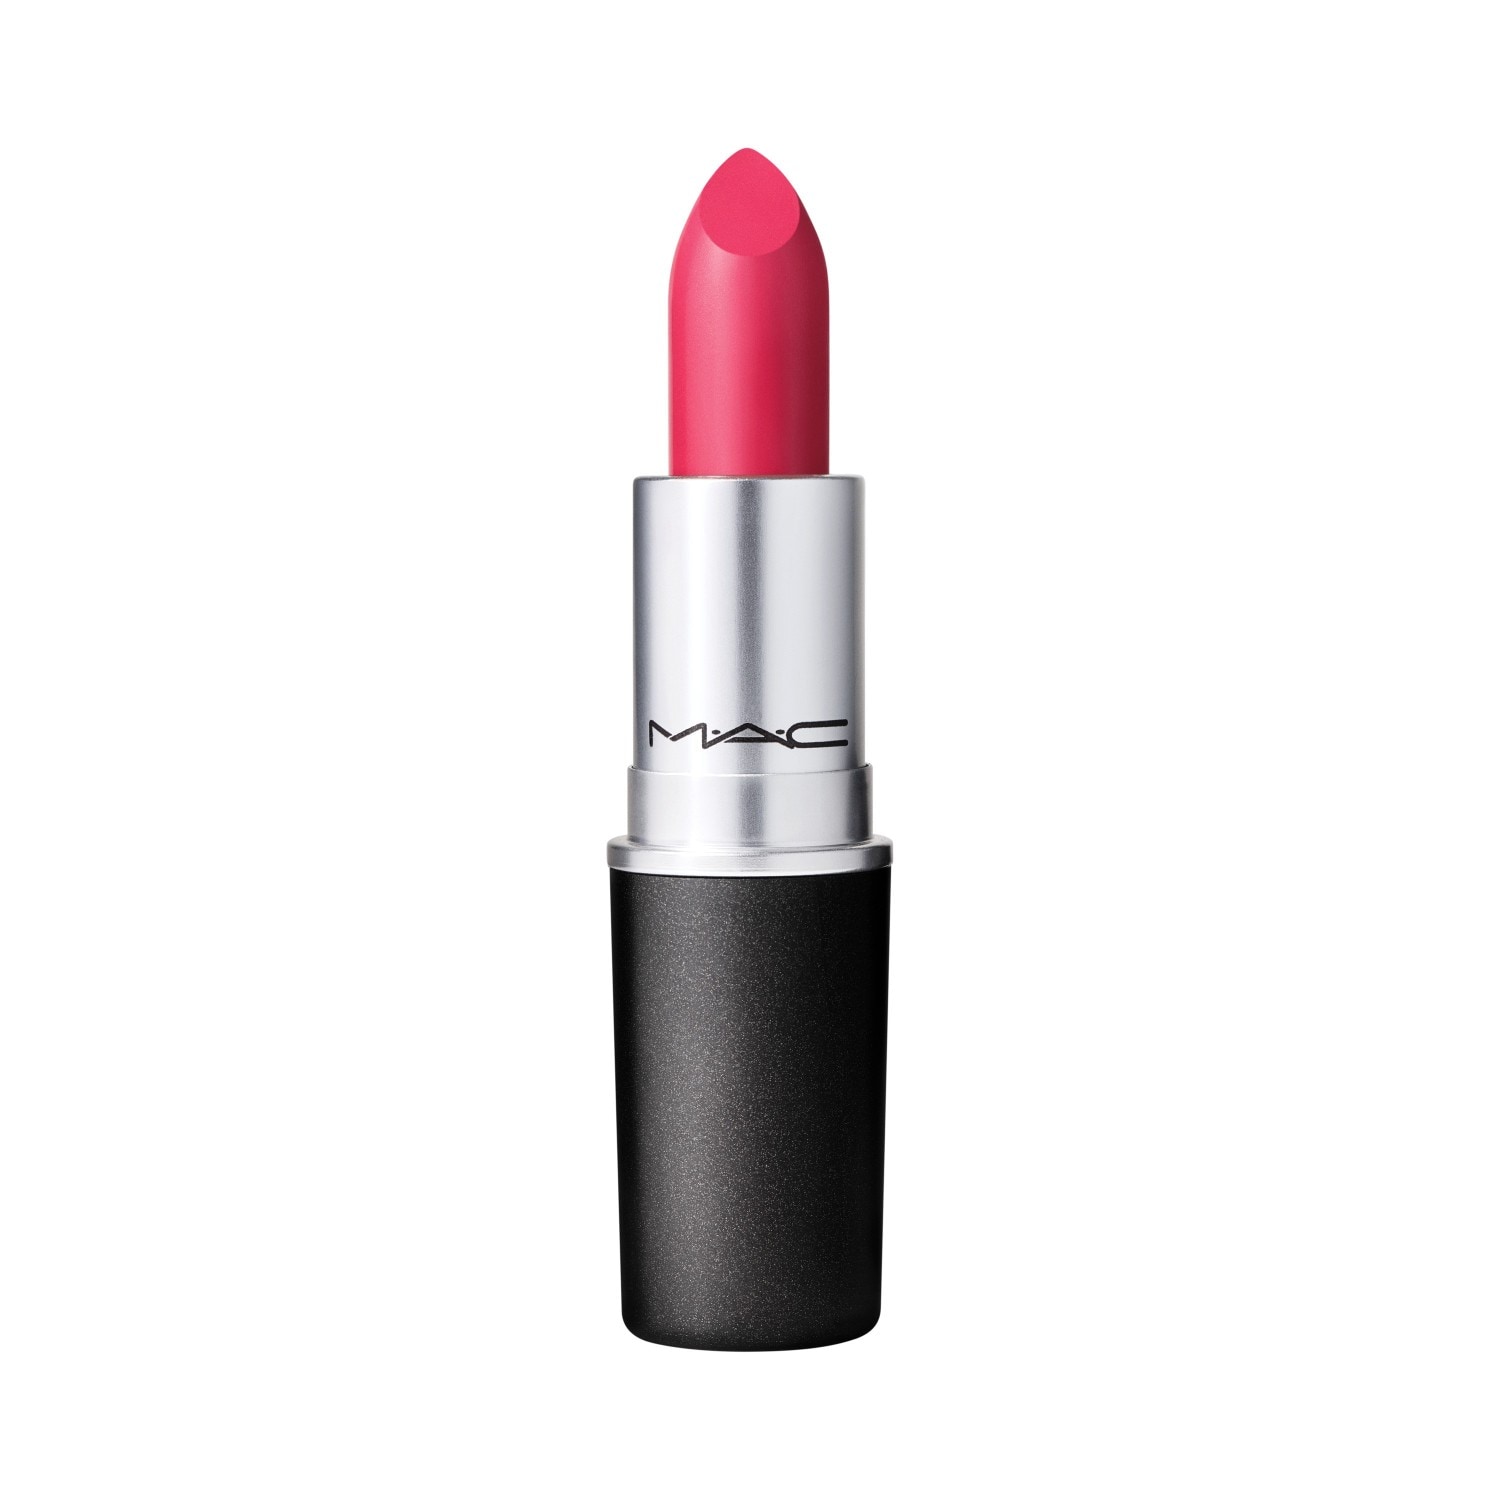 MAC Re-Think Pink Amplified Lipstick, So You